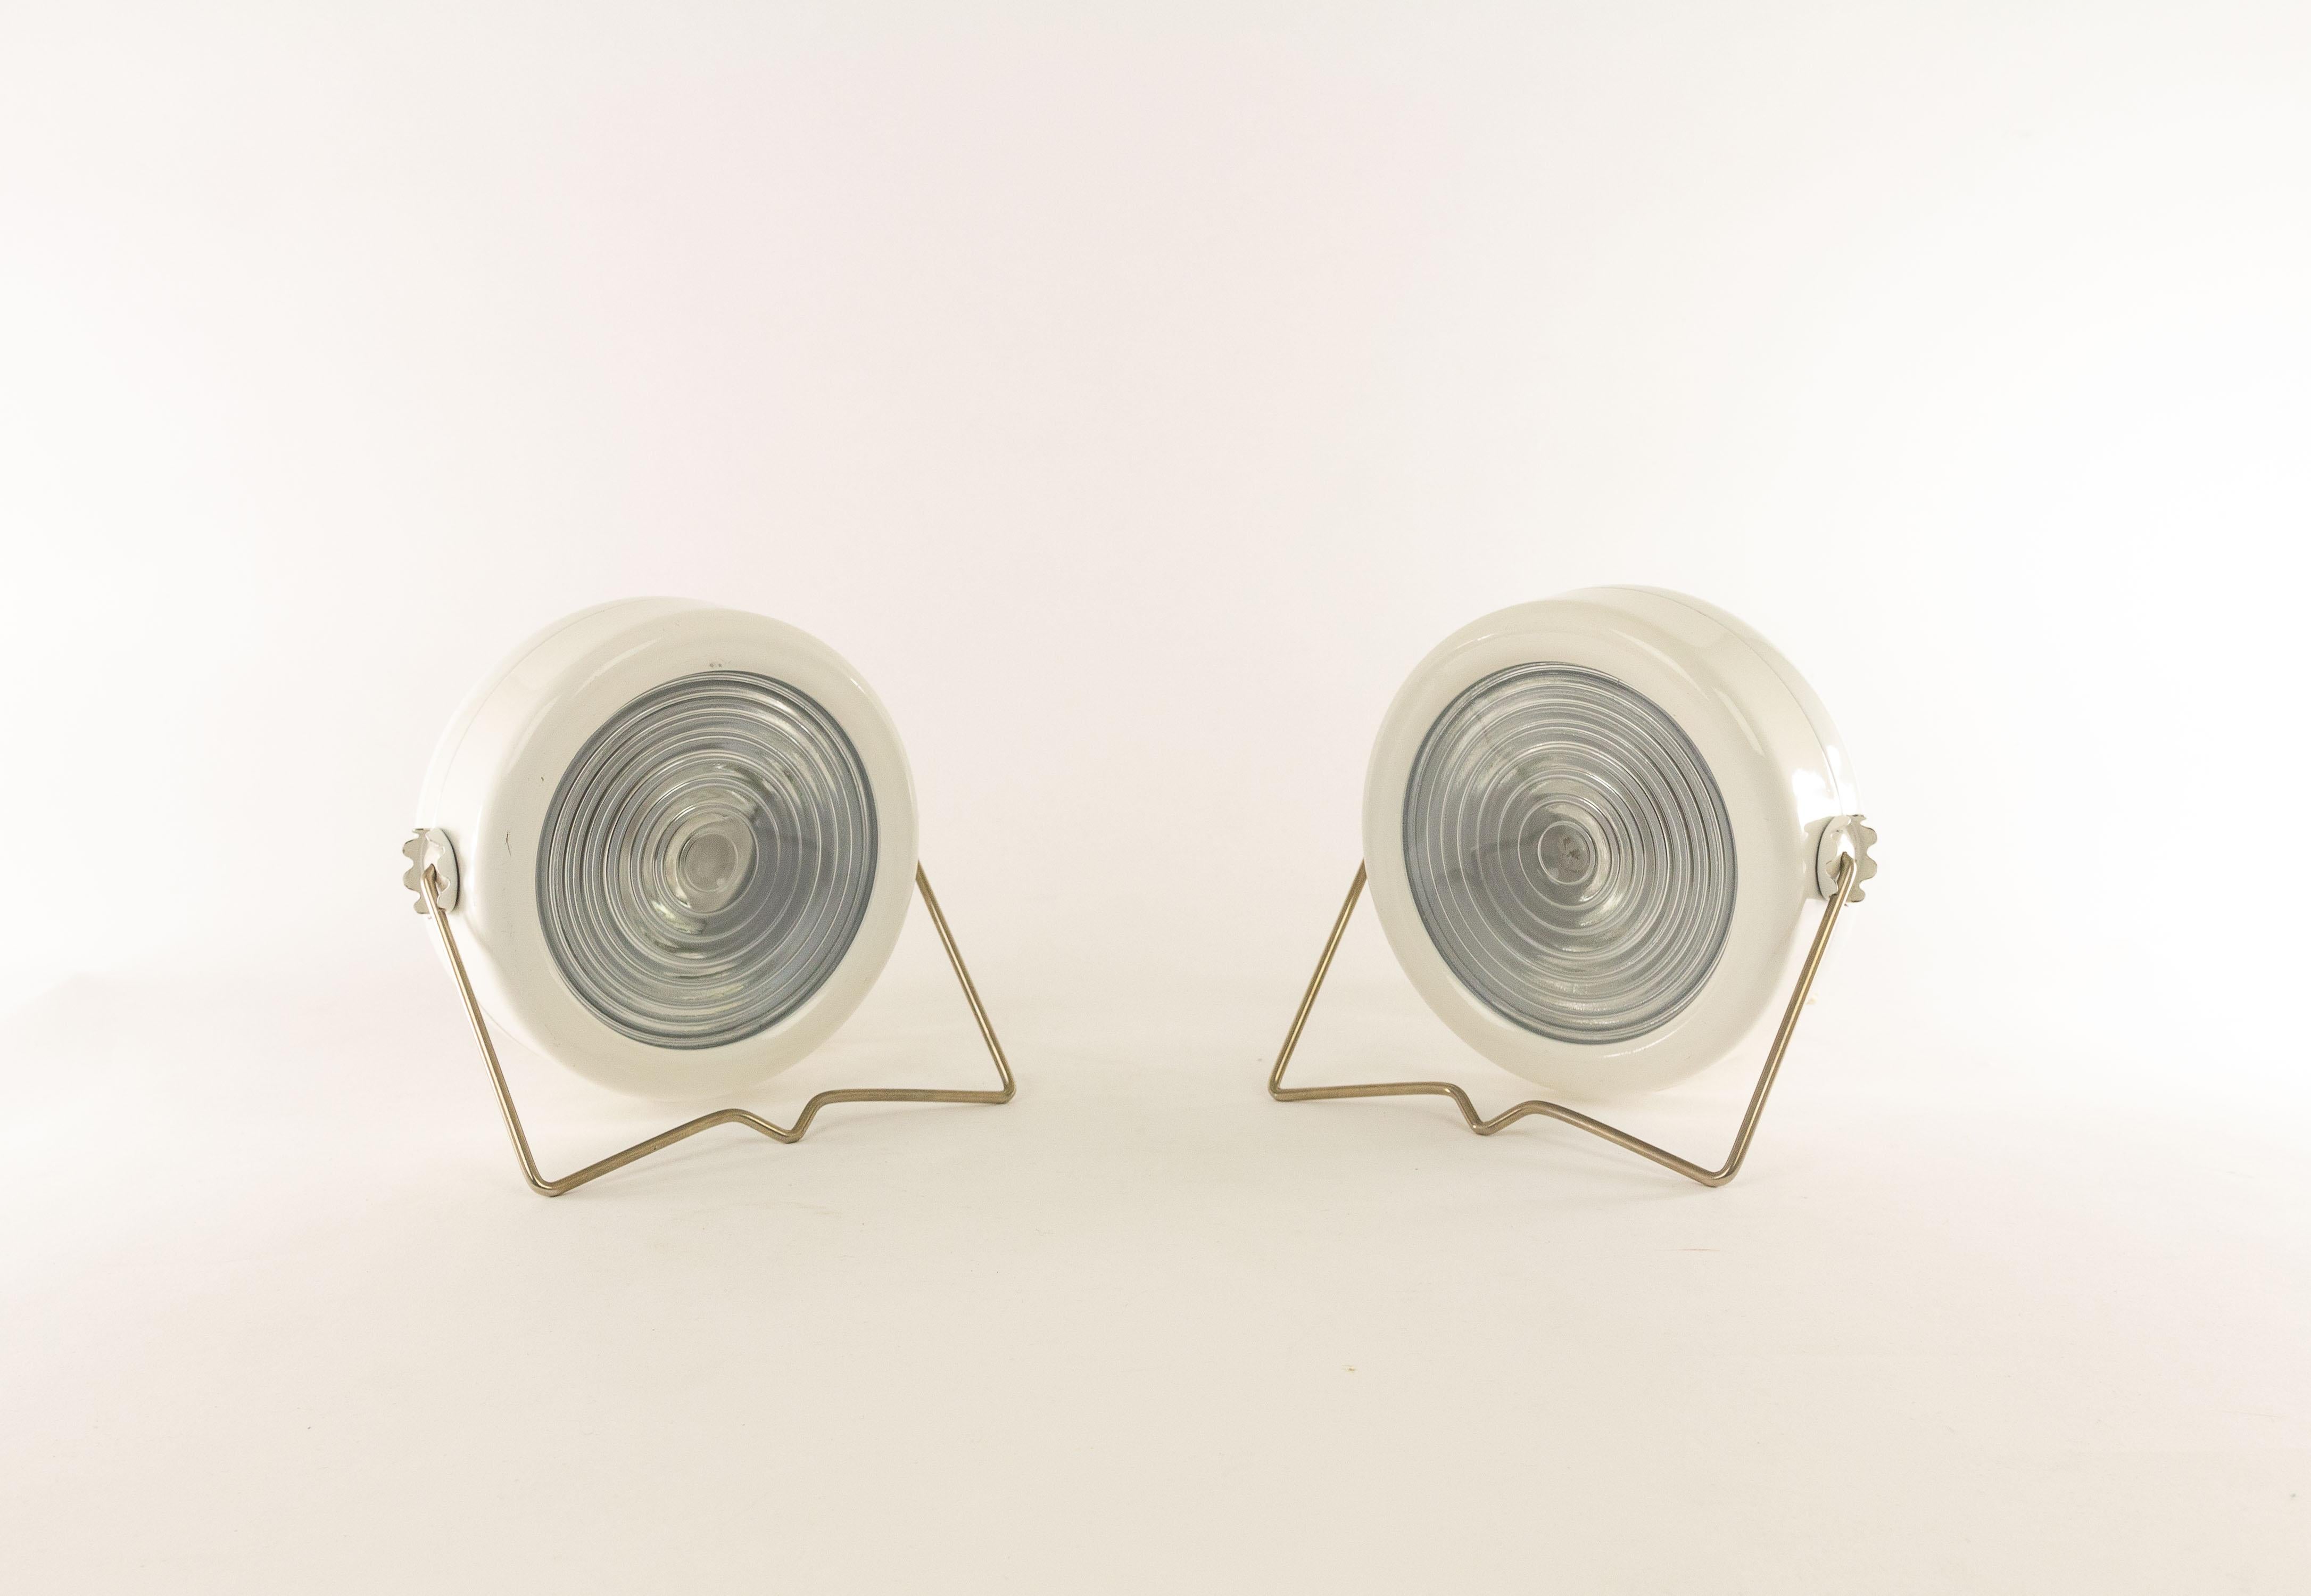 Mid-Century Modern Pair of Sciuko Table Lamps by Achille & Pier Giacomo Castiglioni for Flos, 1966 For Sale